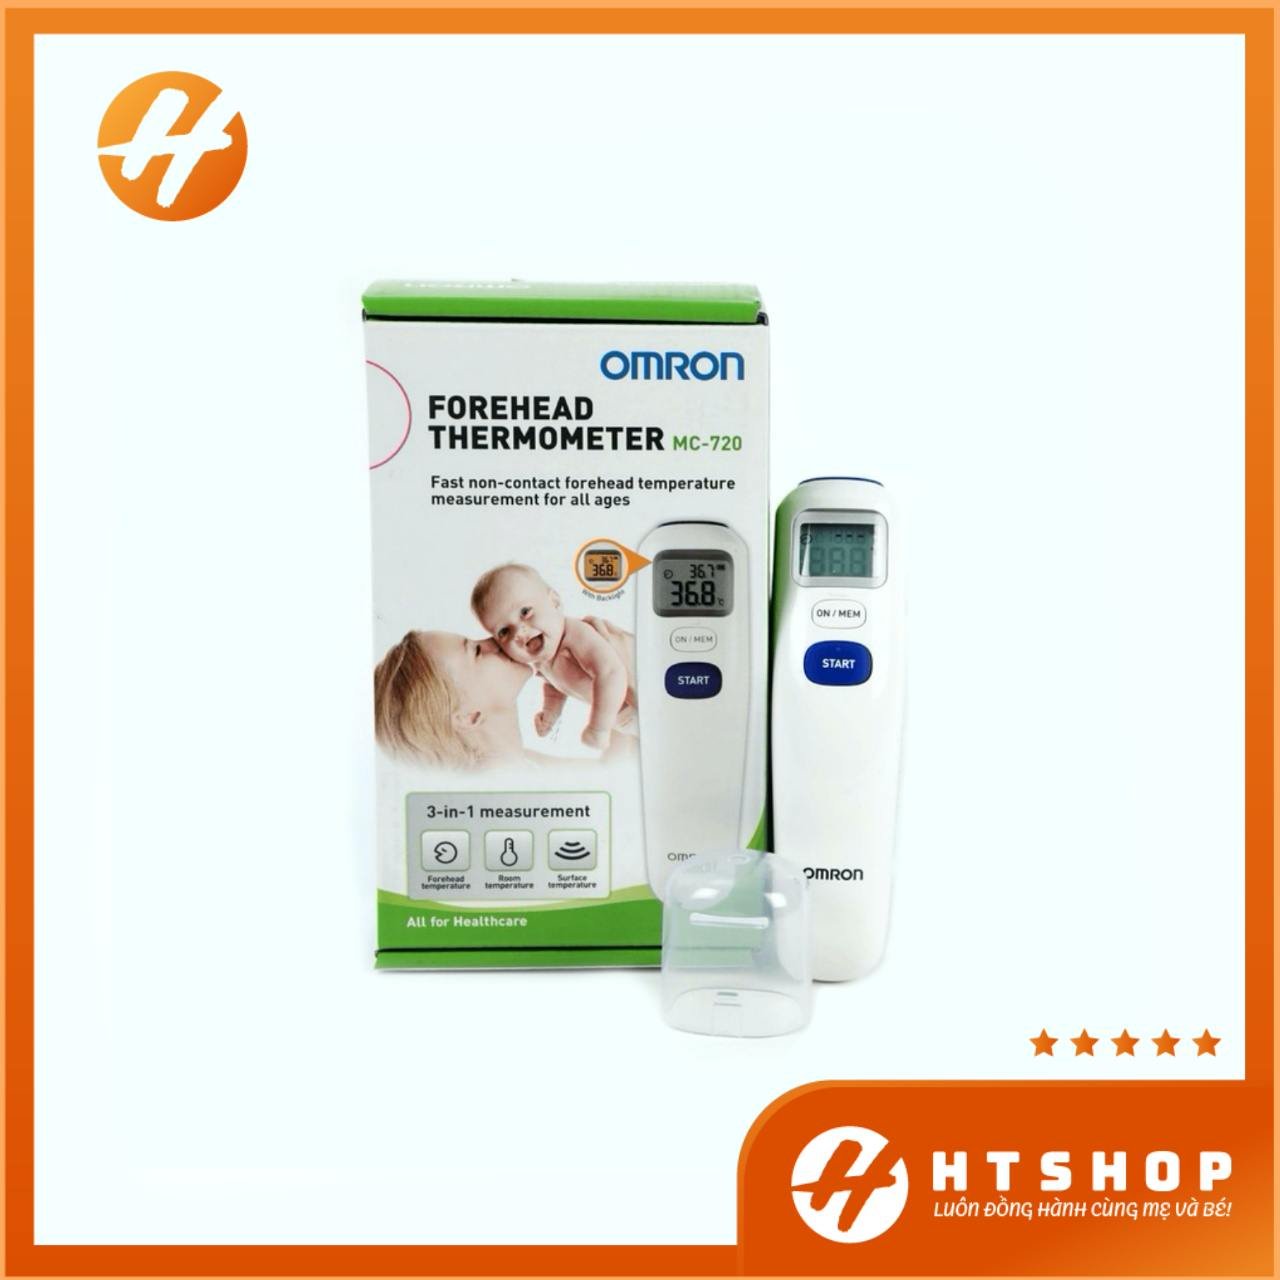 Electronic thermometer forehead Omron mc